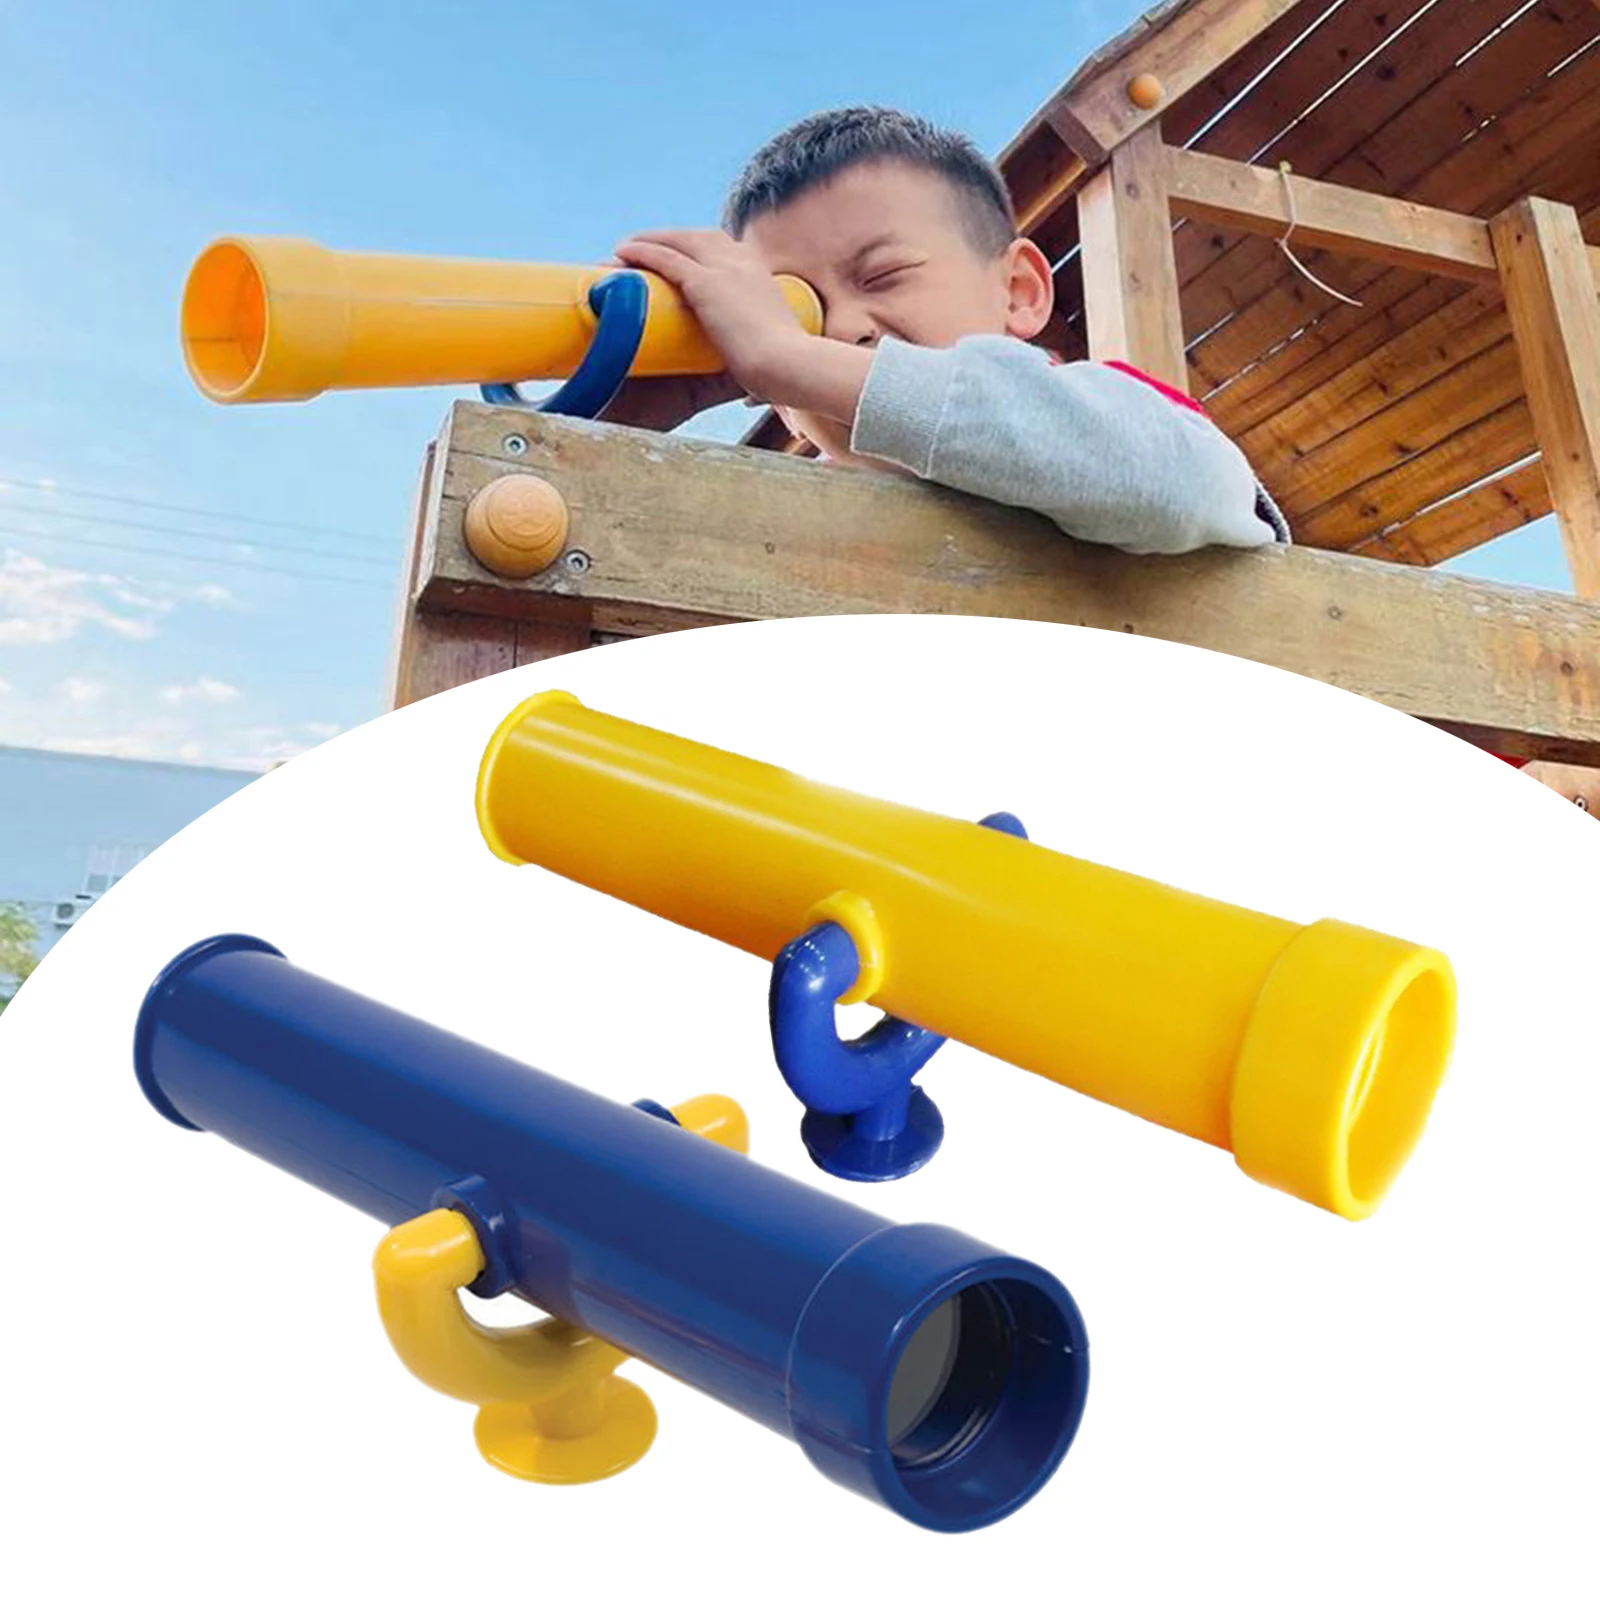 Kids Monocular Telescope Plastic Science Toy Swing Set Accessory for Boys Girls Educational Gift